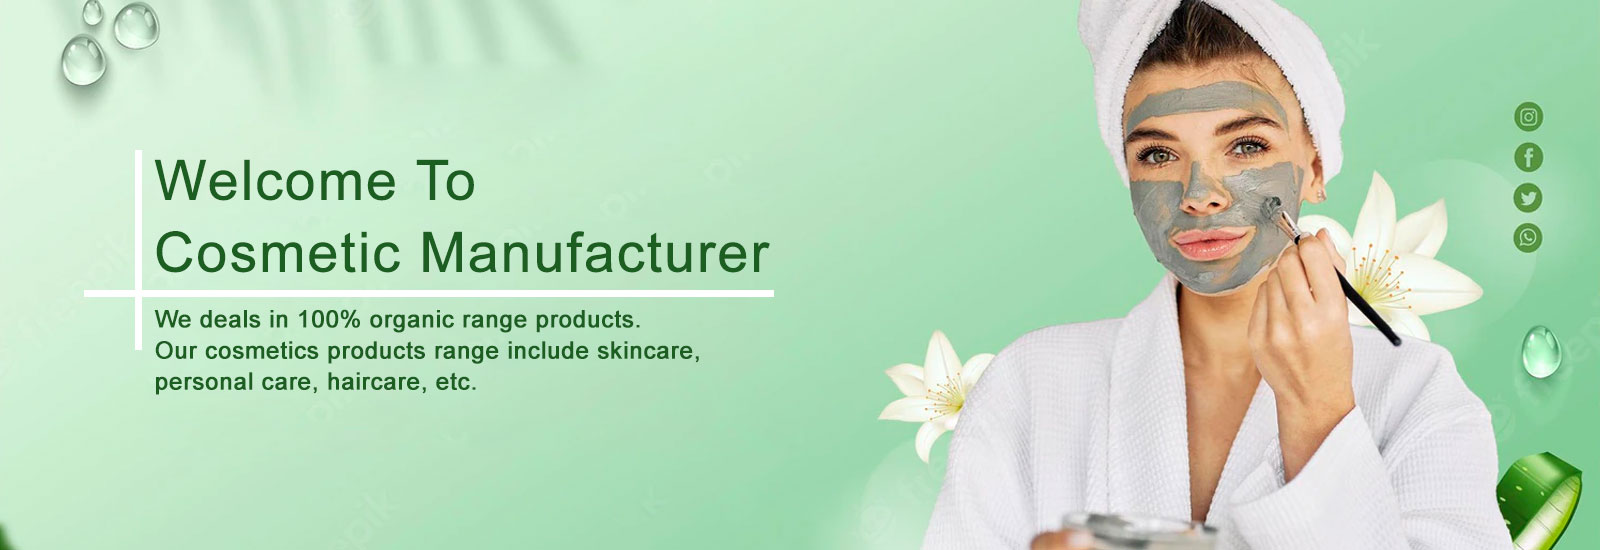 Cosmetic manufacturer banner